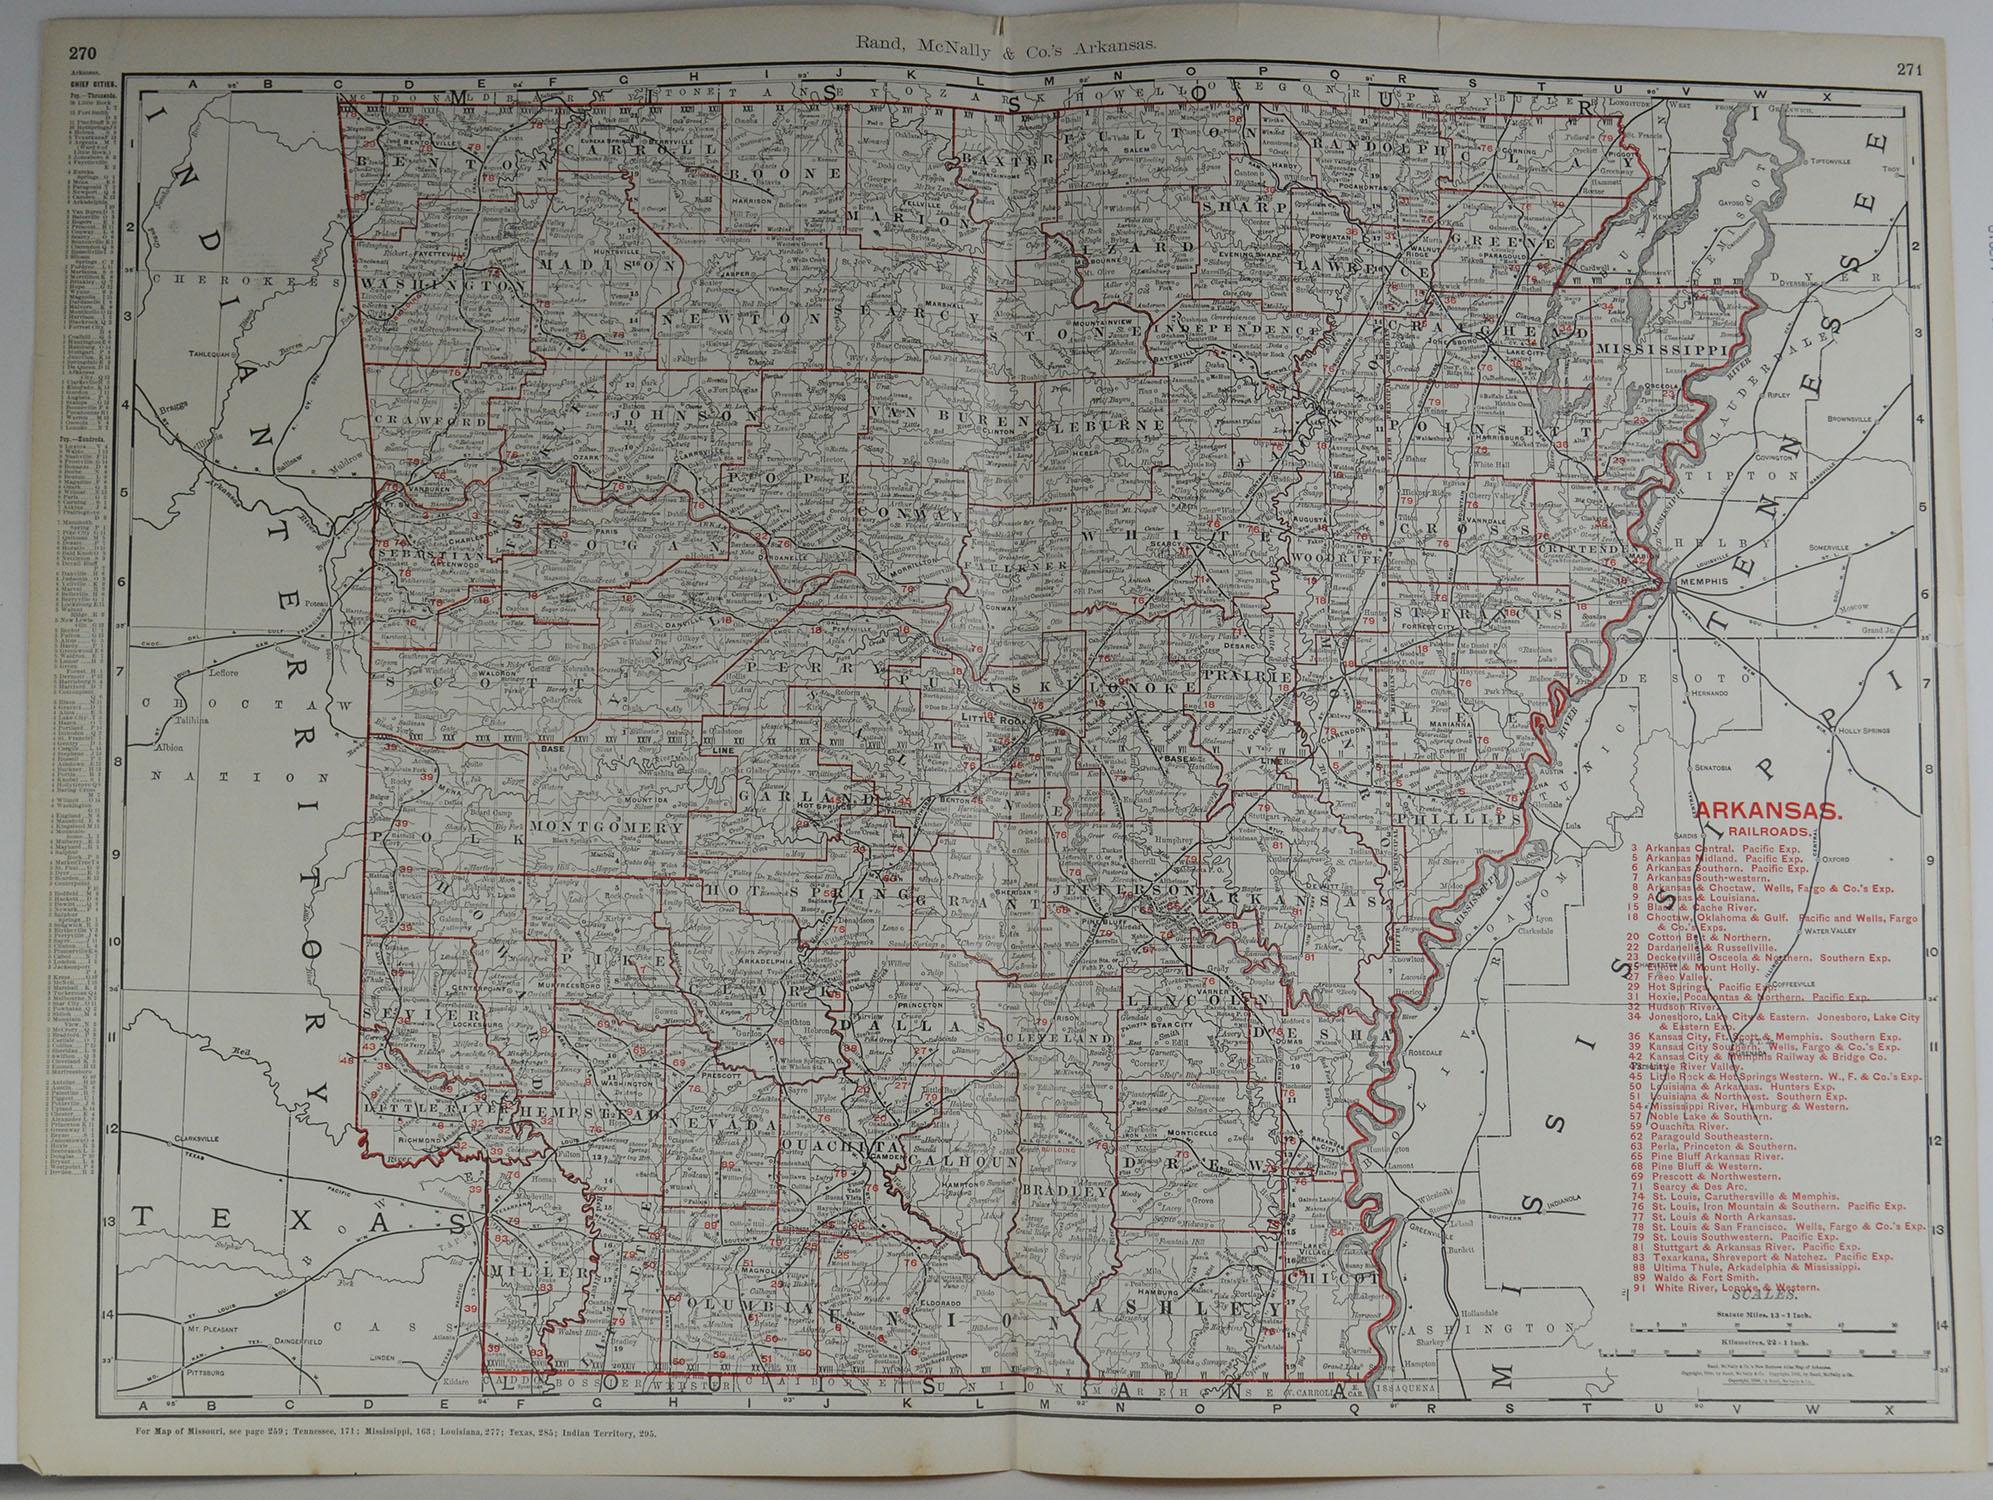 Fabulous monochrome map with red outline color 

Original color

By Rand, McNally & Co.

Published, circa 1900

Unframed

Minor edge tears.